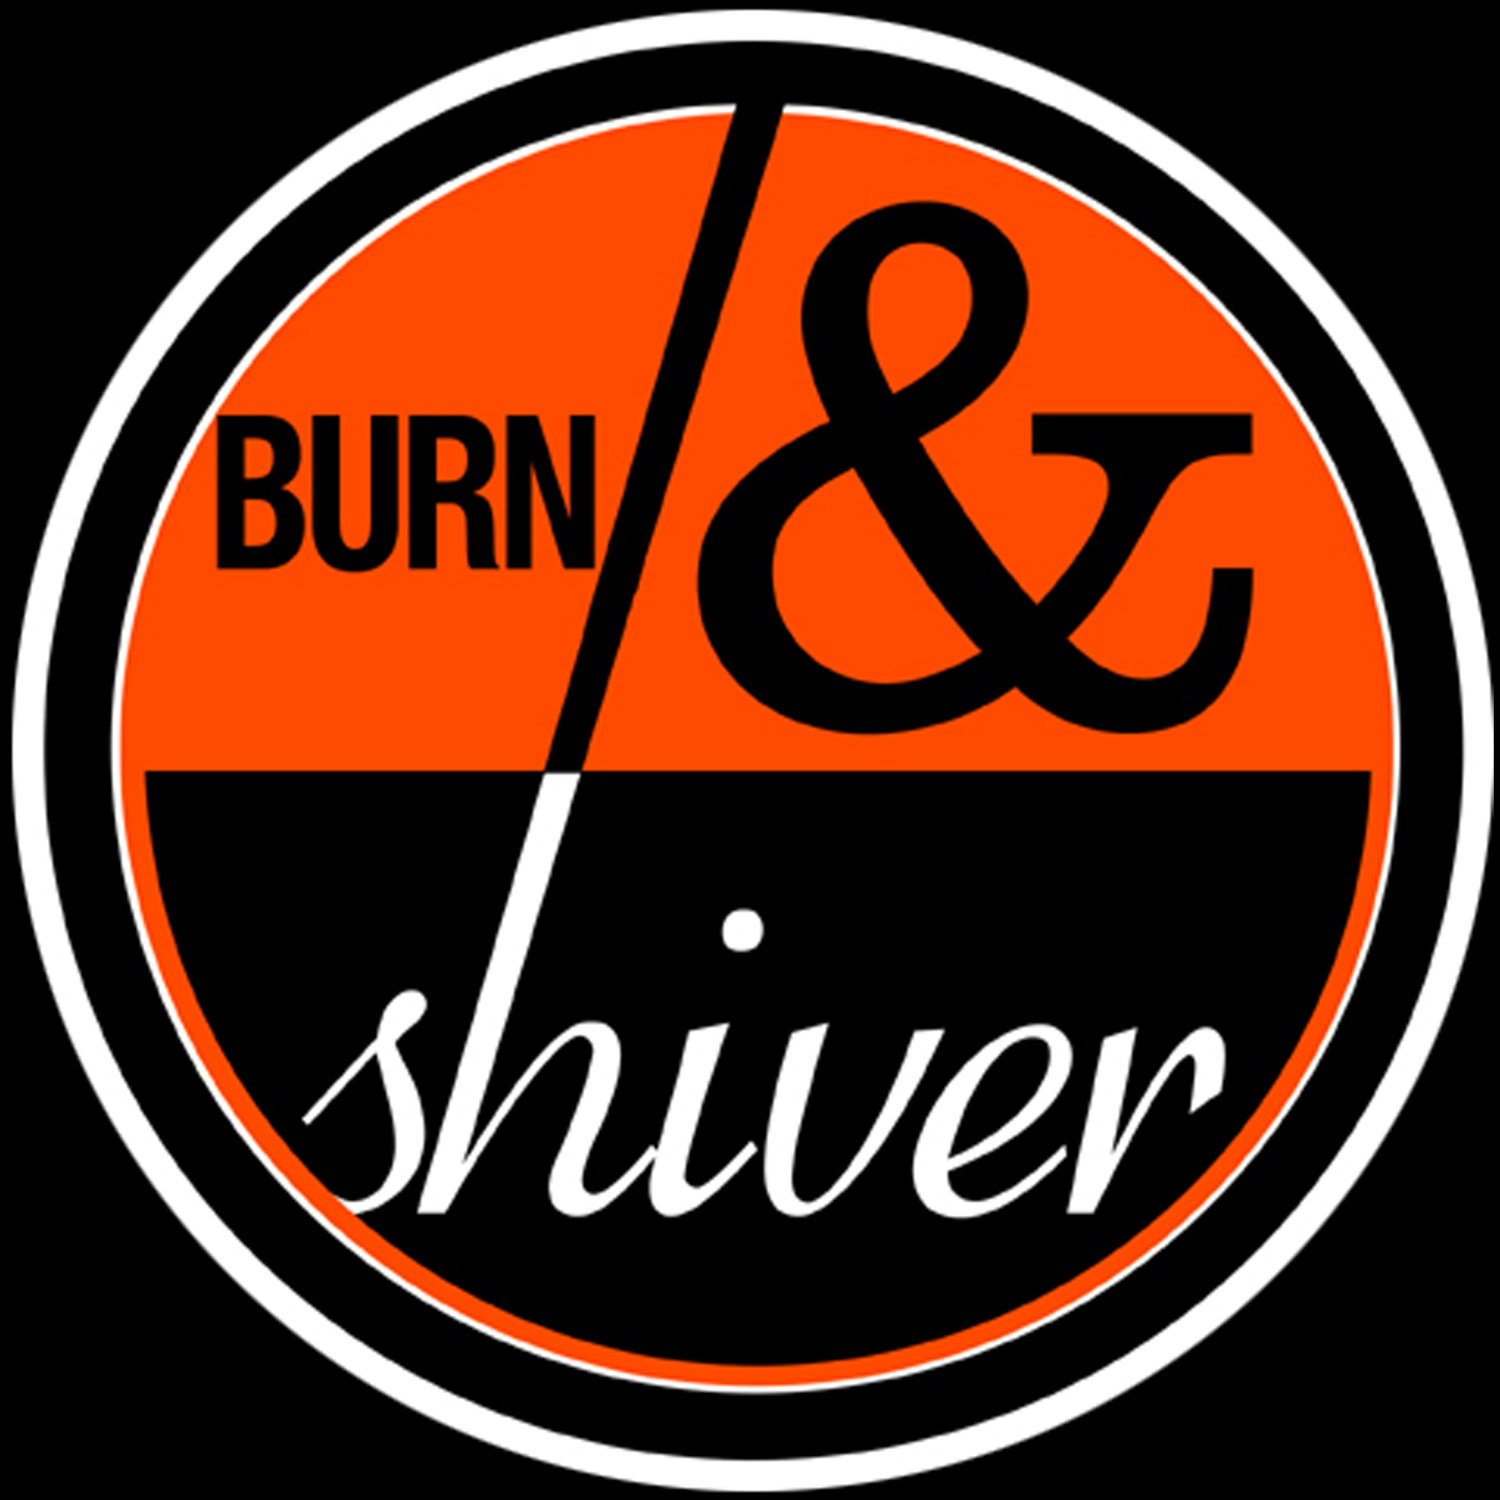 Burn and Shiver